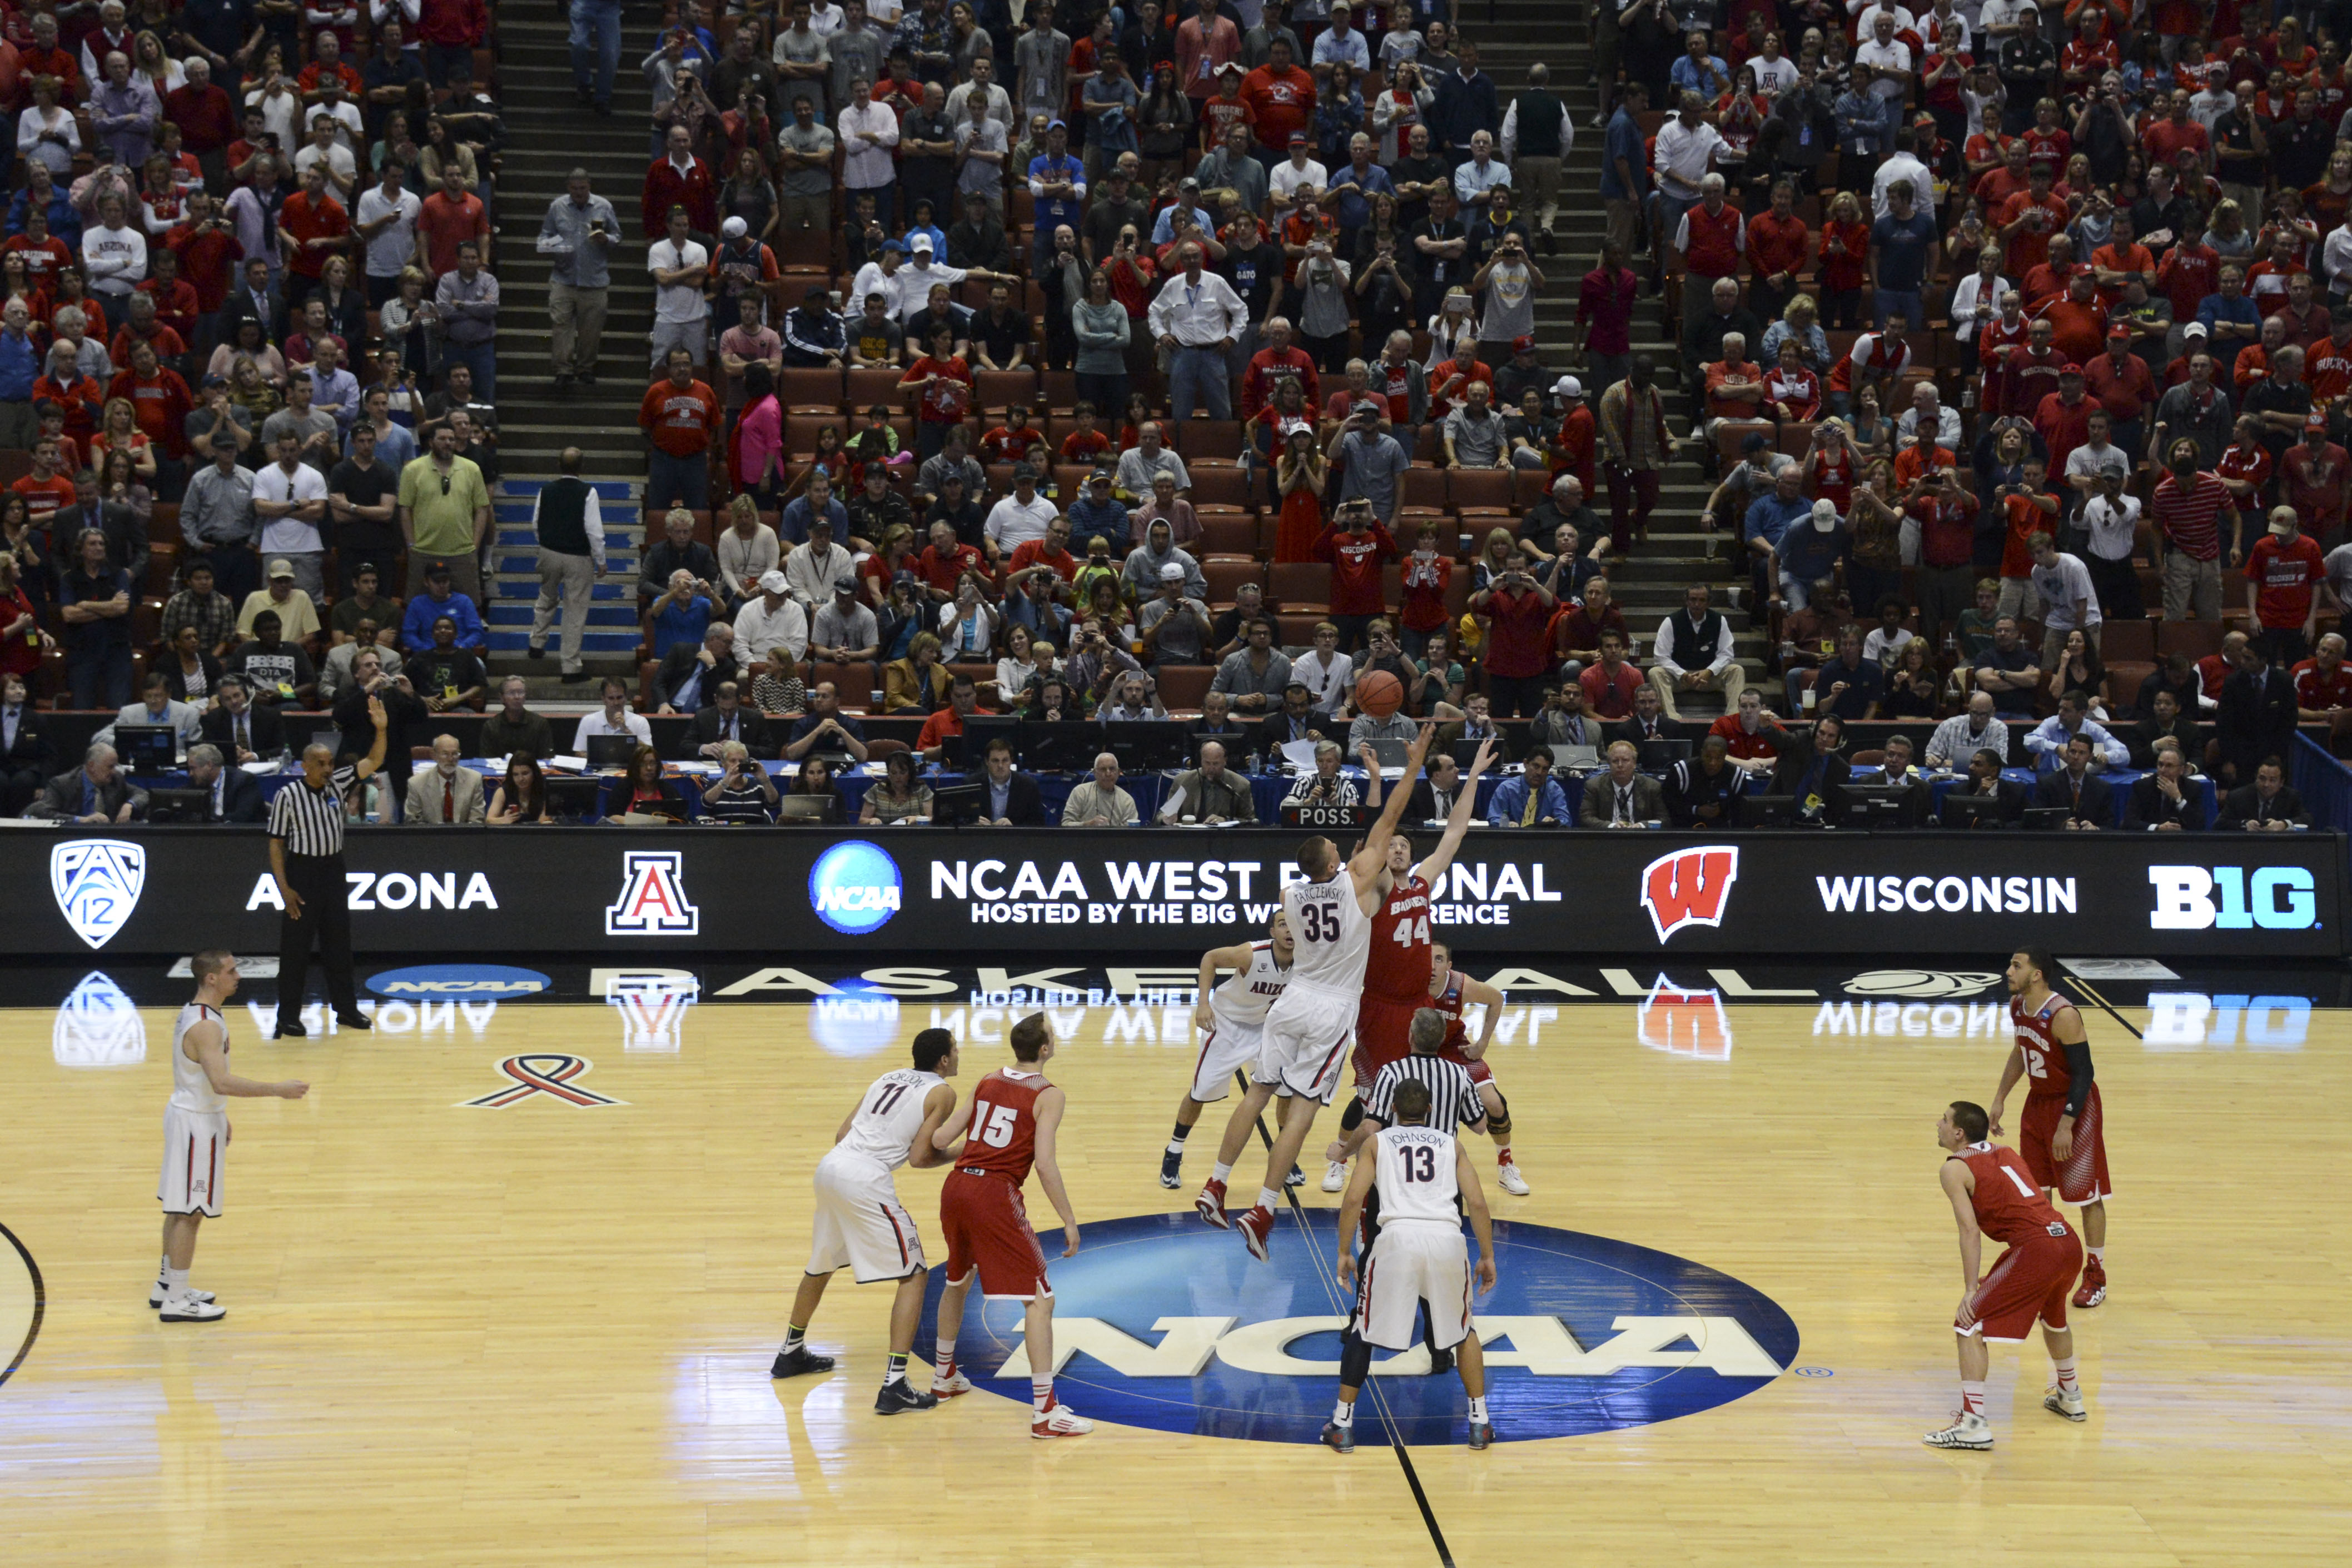 Tip-off in last year's regional final. (USA TODAY Sports Images)